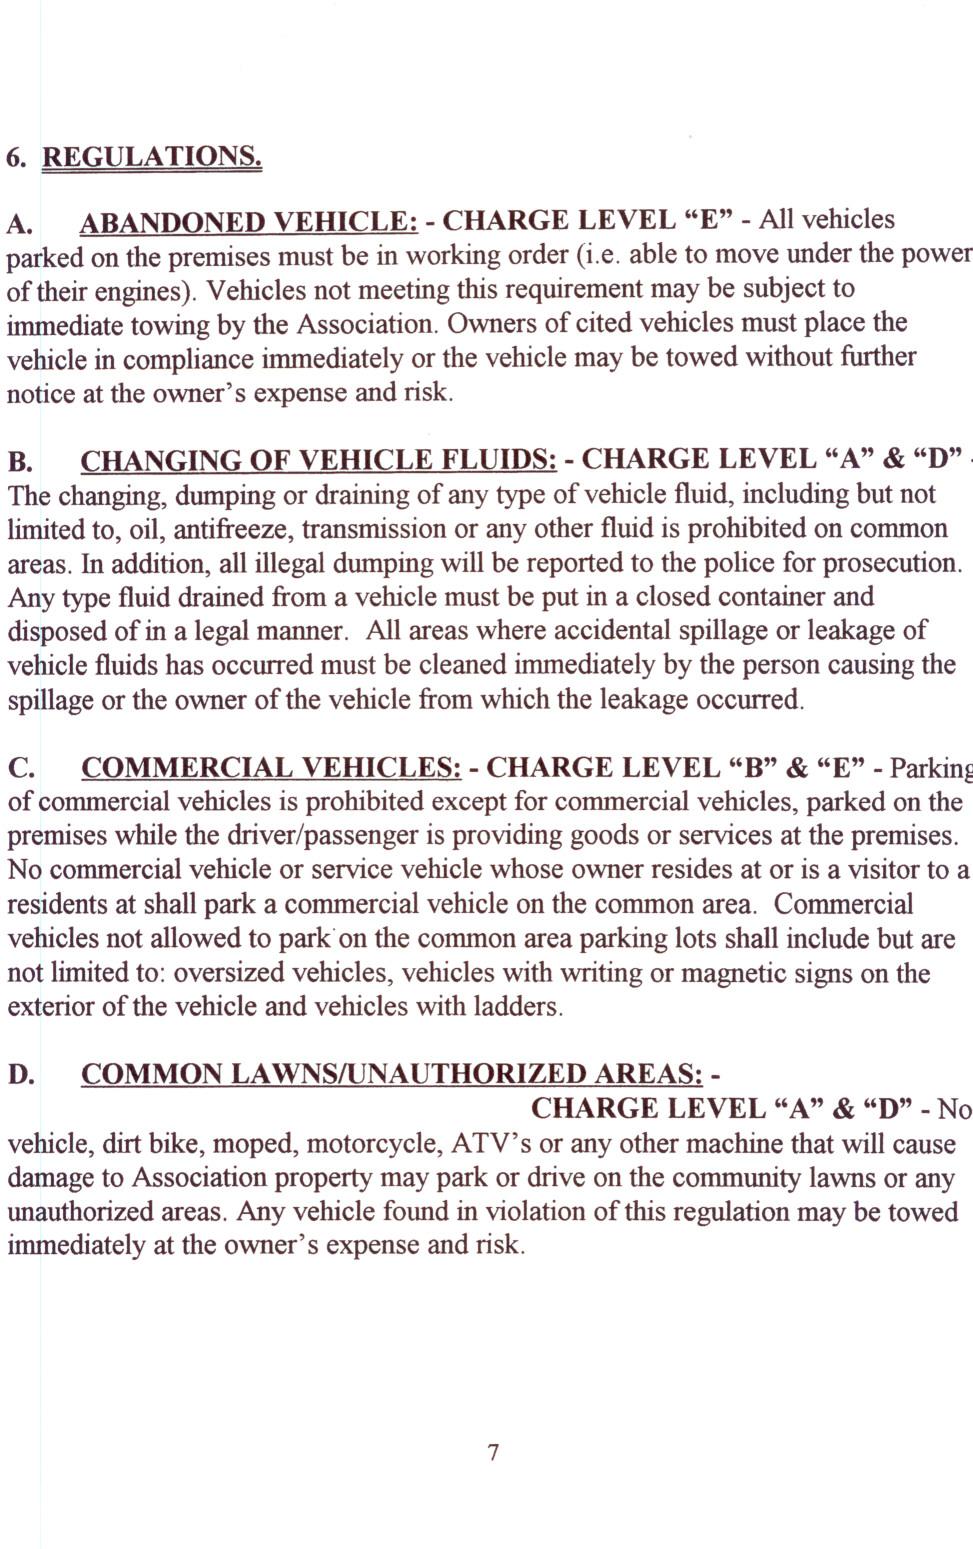 6. REGULATIONS. A. ABANDONED VEHICLE: - CHARGE LEVEL "E" - All vehicles parked on the premises must be in working order (i.e. able to move under the power of their engines).